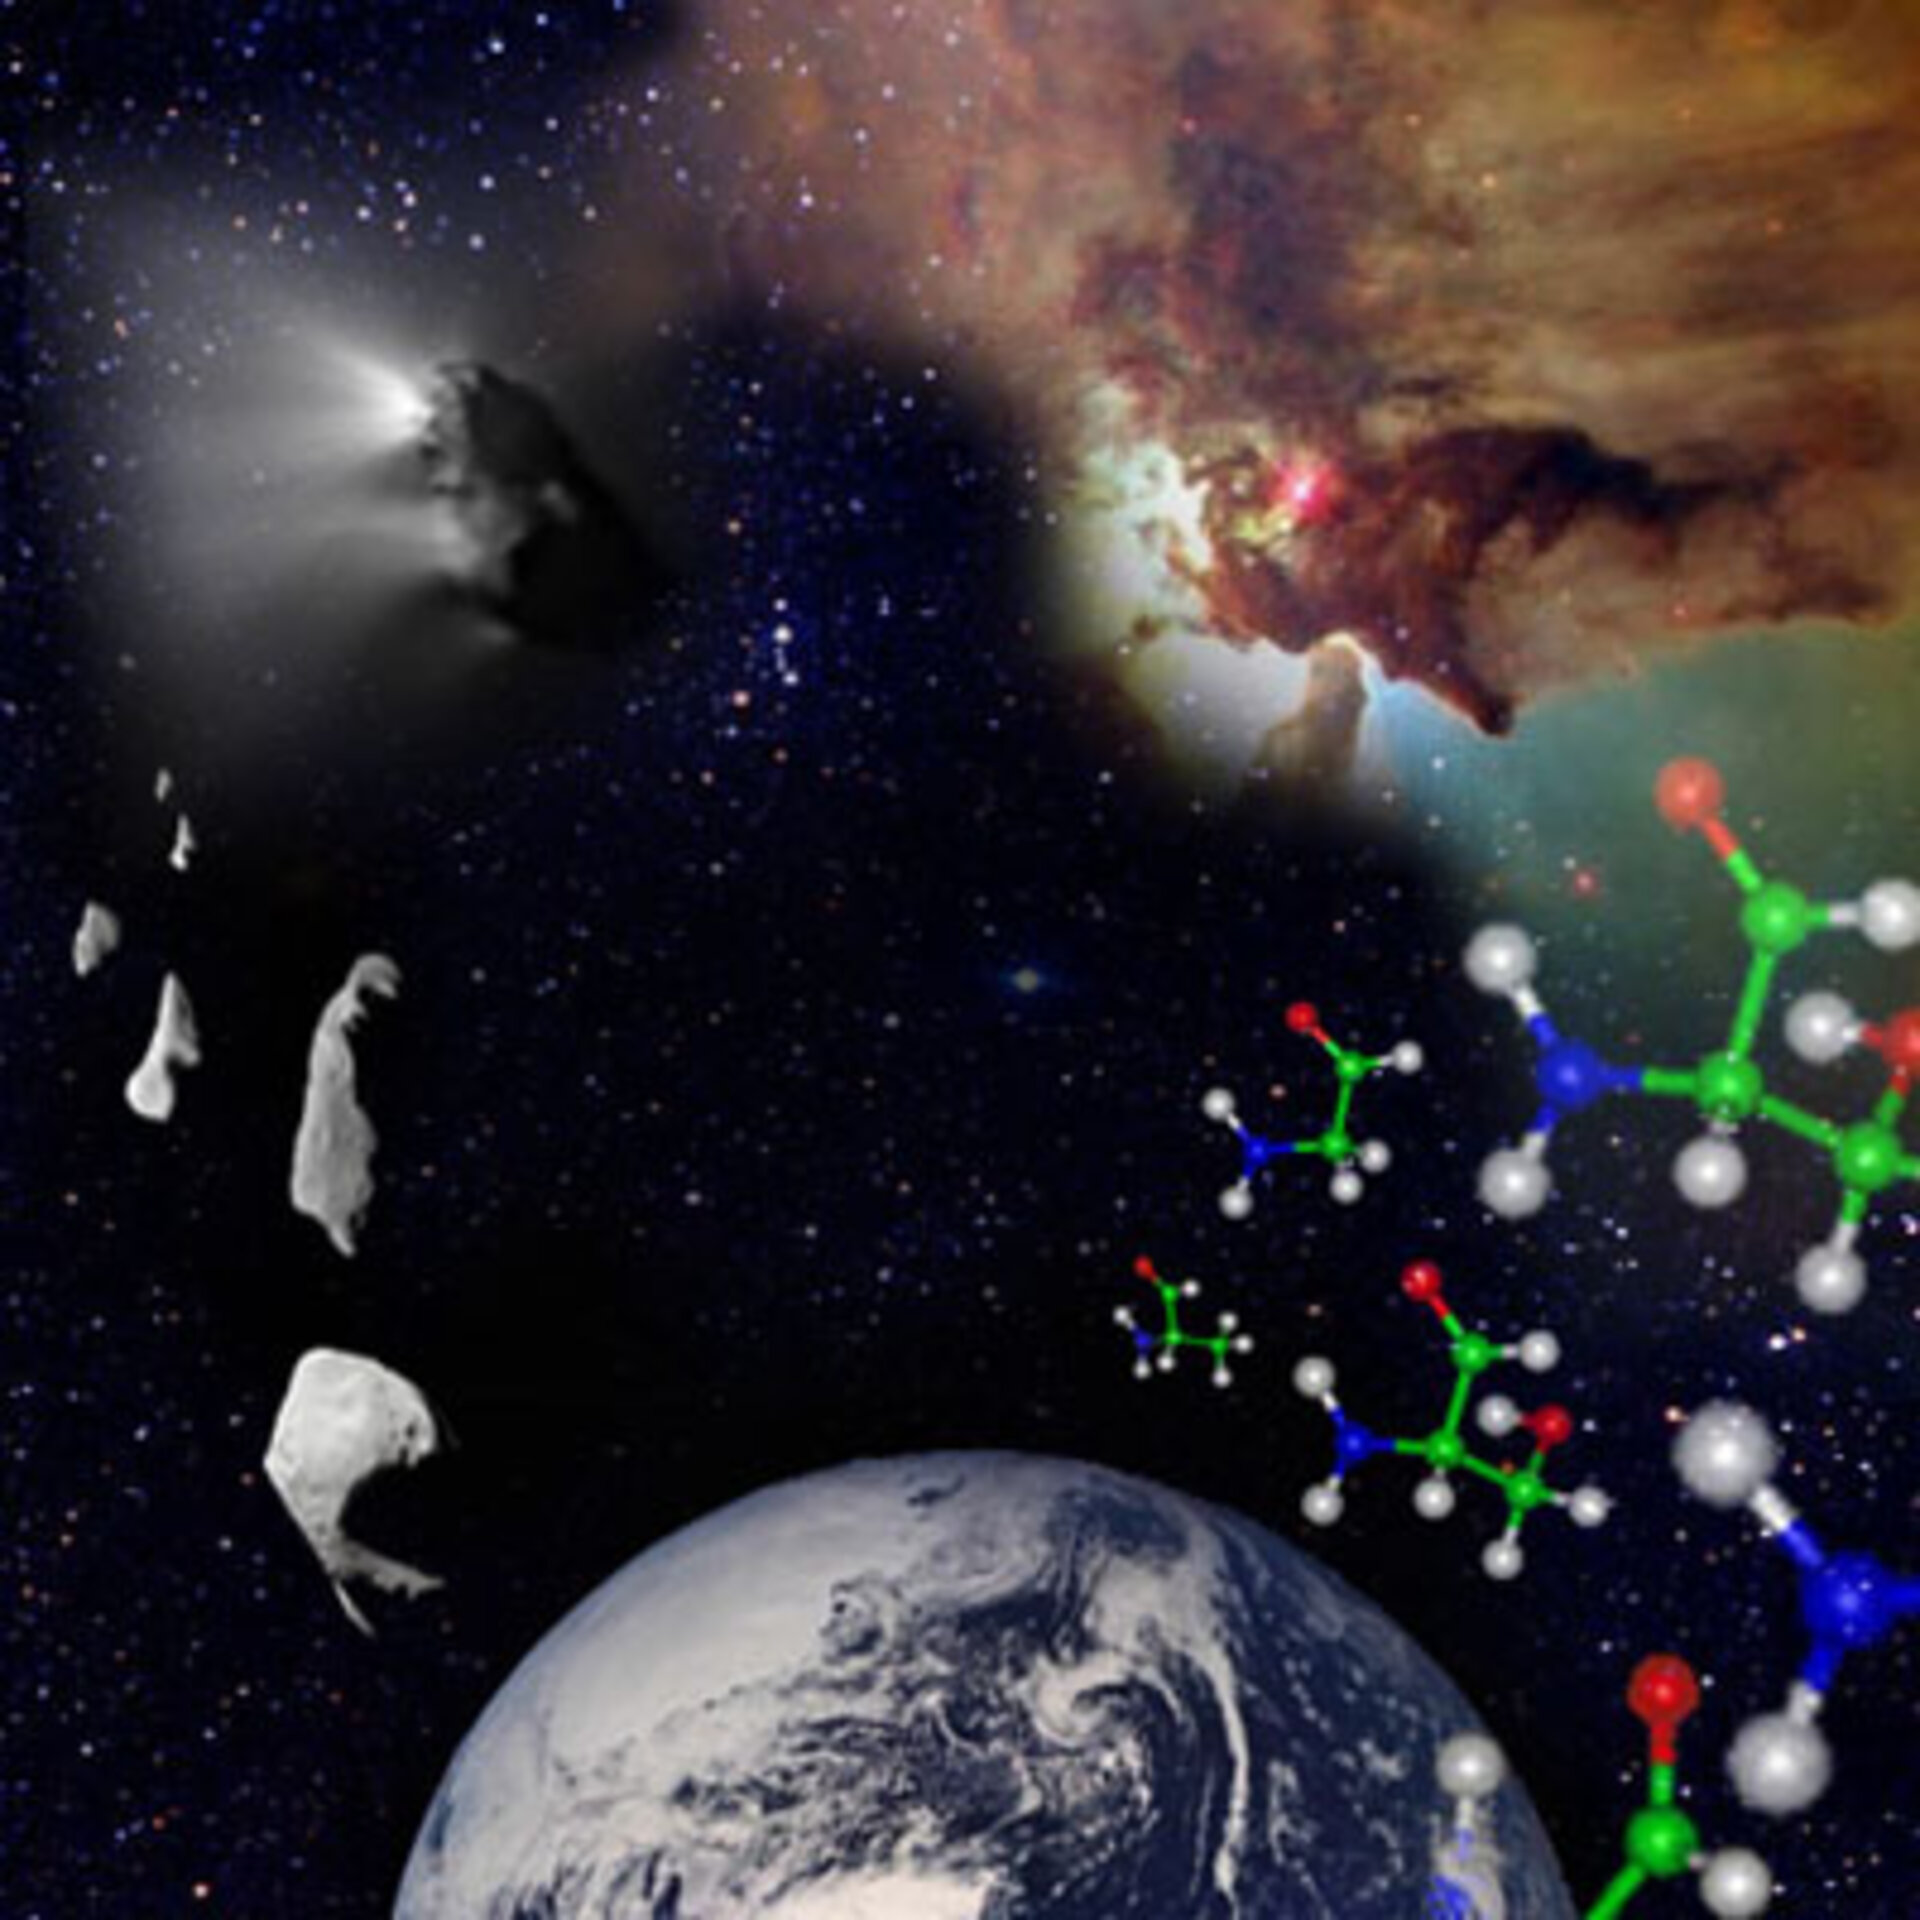 Did the main ingredients for life come from outer space?